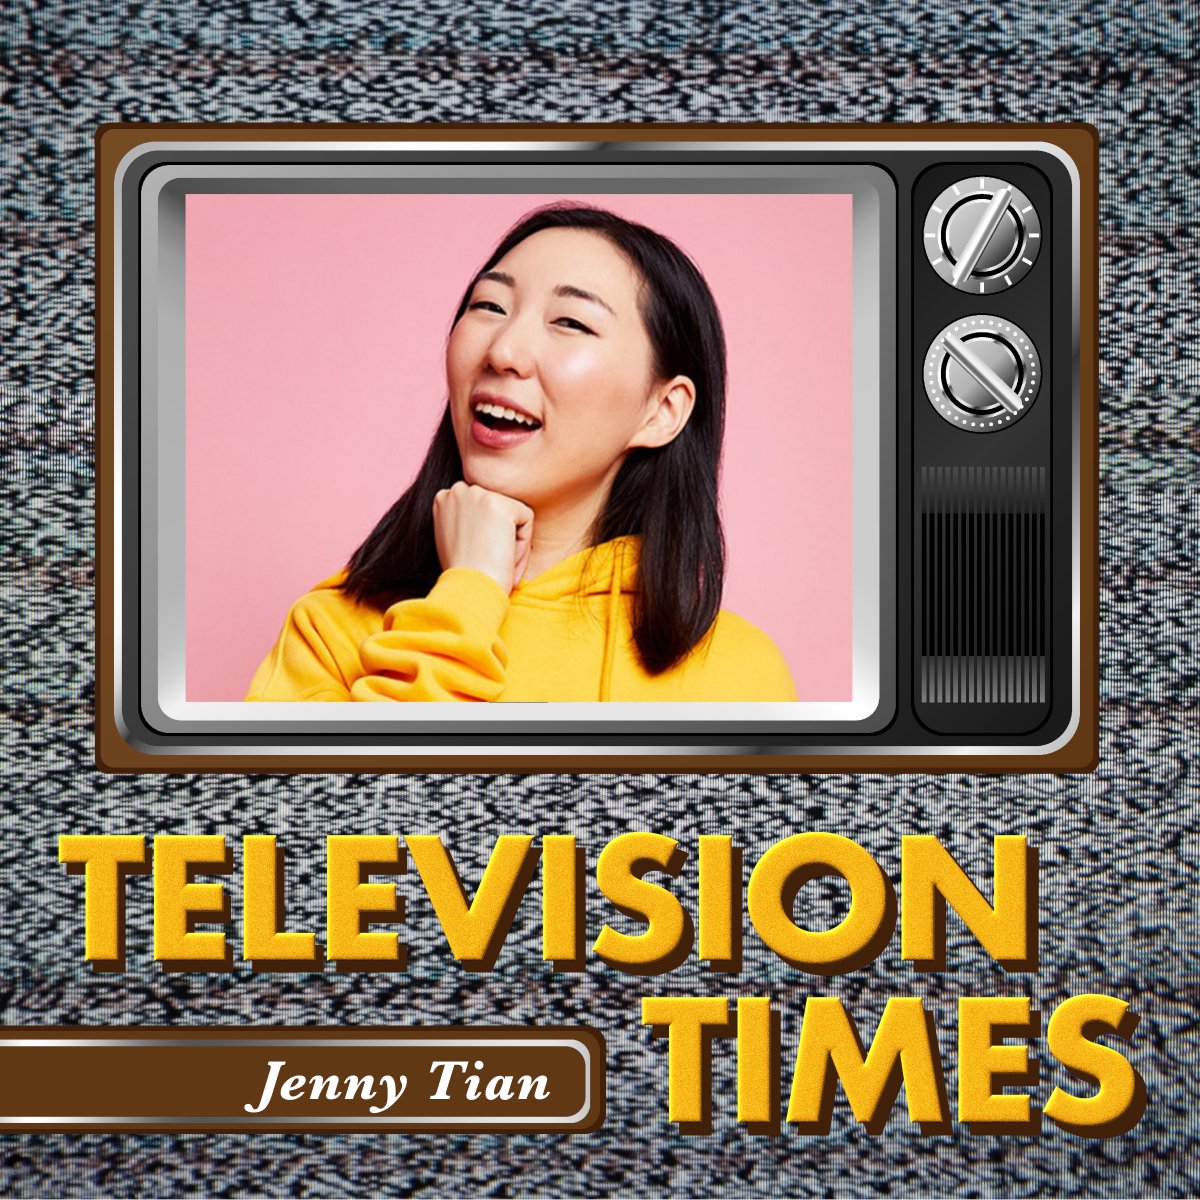 Do you know what parasocial means? I didn't. Aussie stand up and Tik-Tokker Jenny Tian explains it perfectly on @tvtimespod Ep23 Out now! #jennytian #steveotisgunn #comedypodcast #tv #television #comedian #australia #parasocial #podcast #funny #edfringe #telly #pod #follow #meme